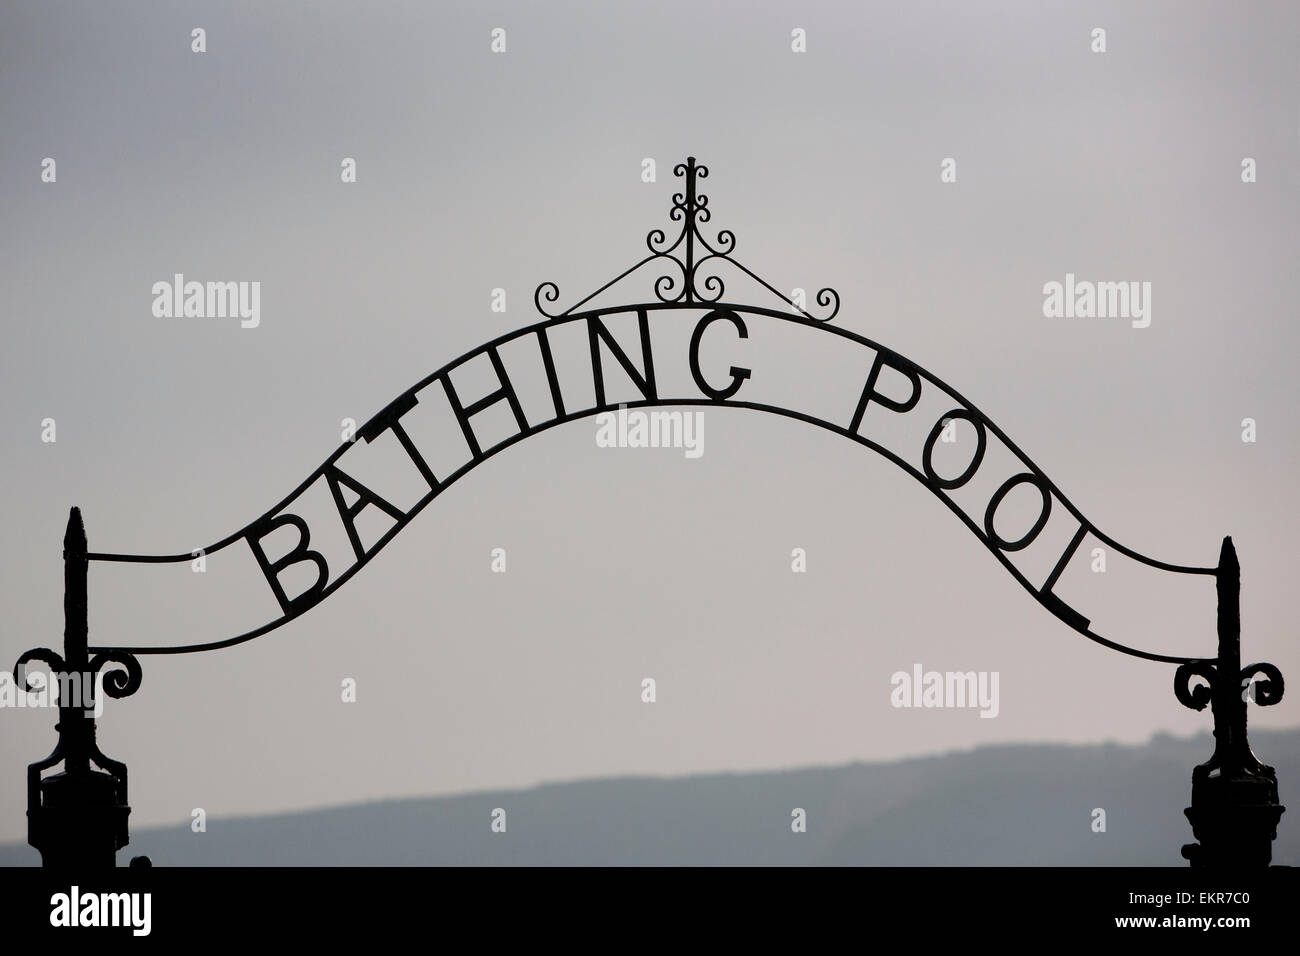 A metal arch over a gate to the Bathing Pool in a resort. Stock Photo